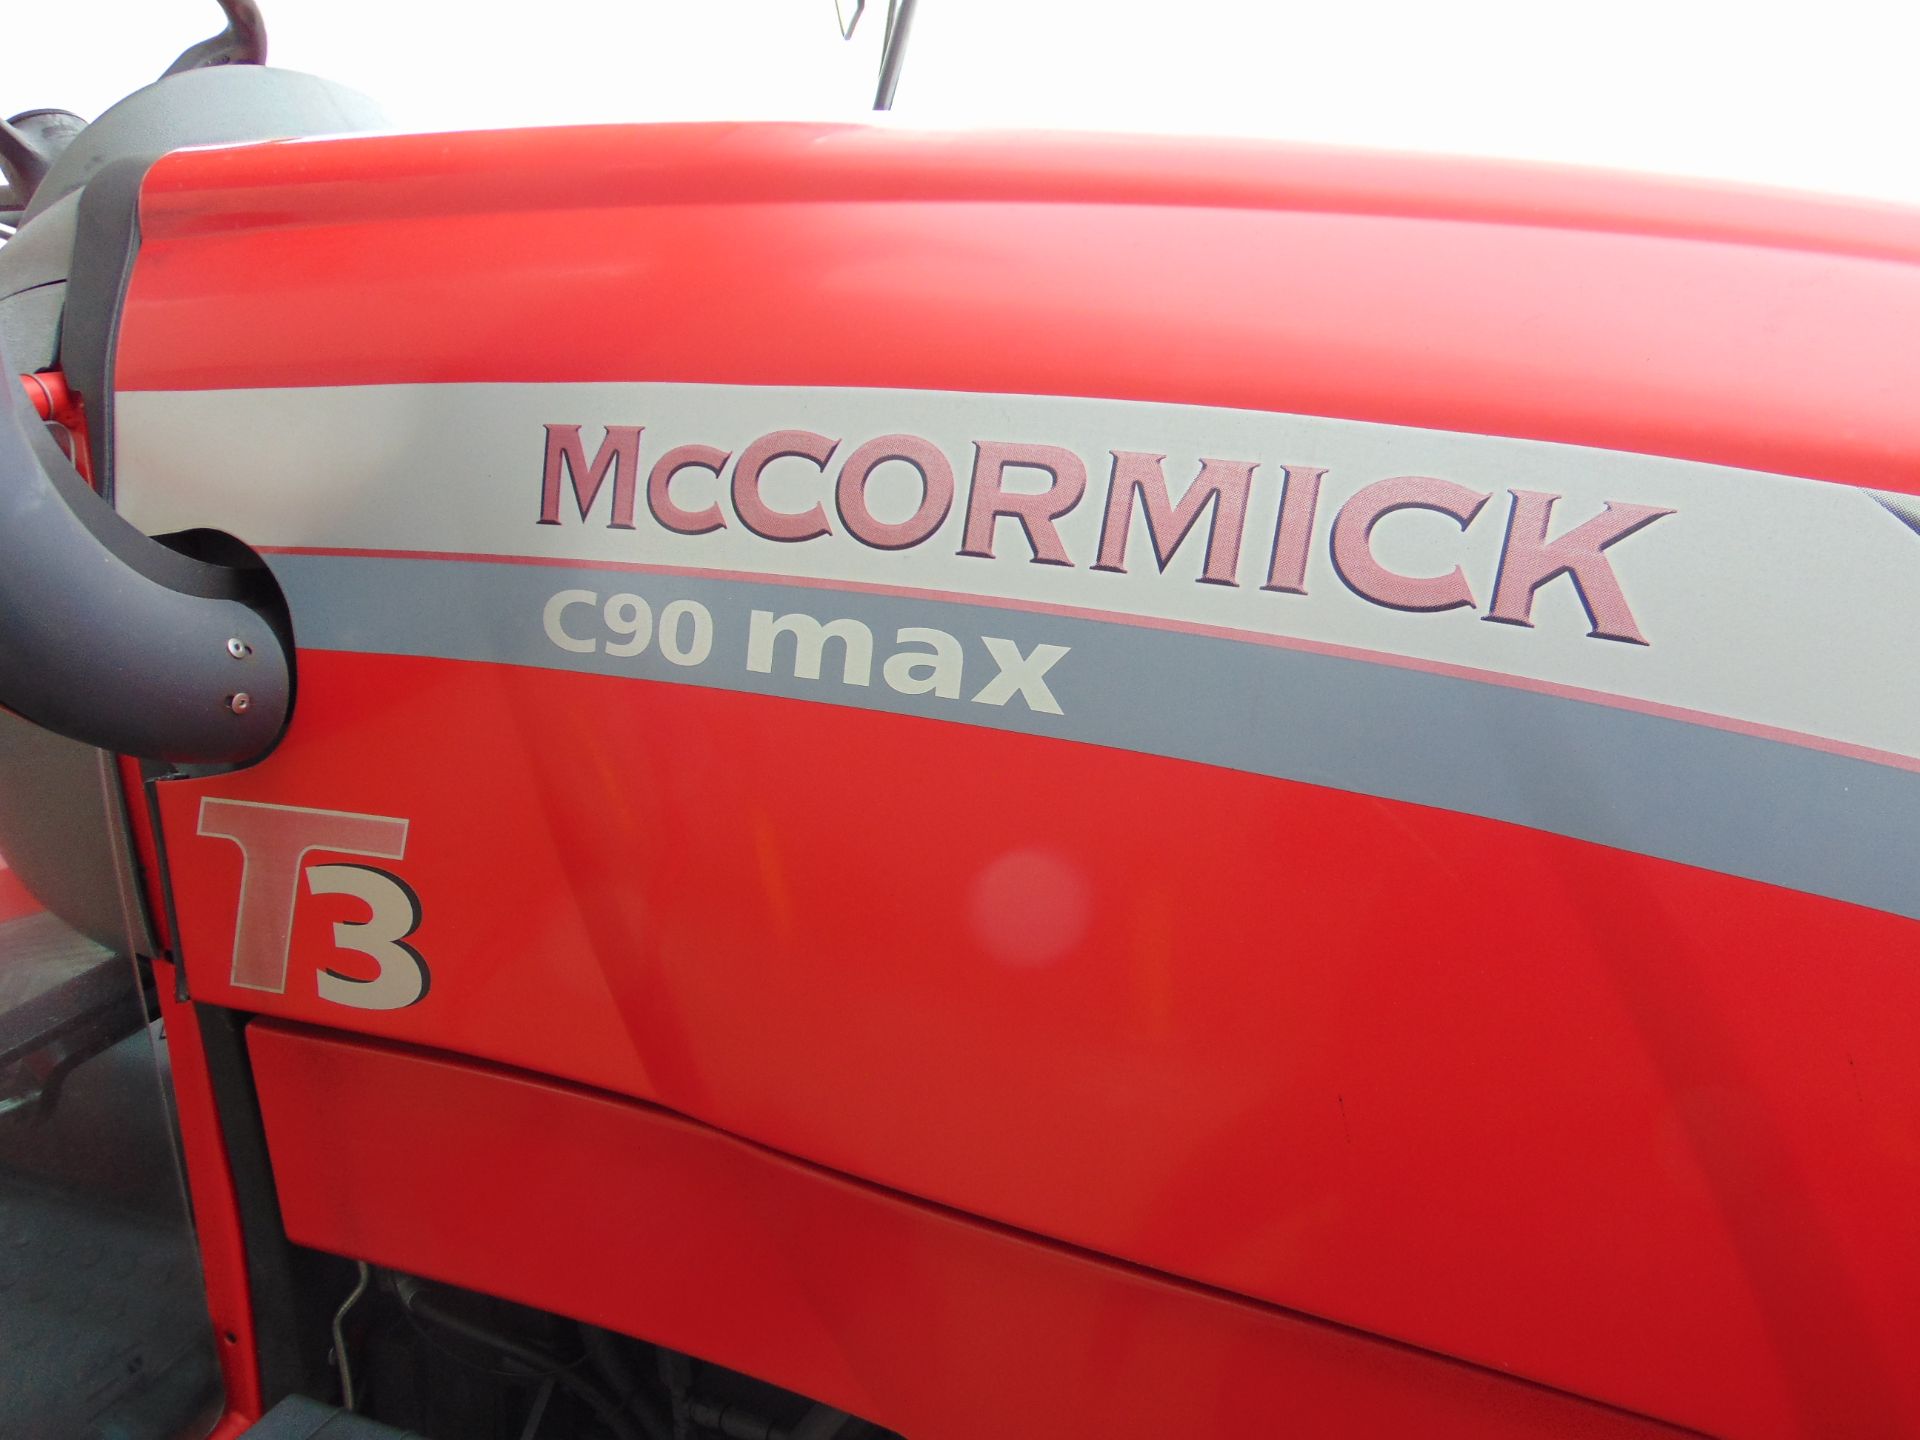 New Unused 2017 McCormick C90 Max T3 4WD Agricultural Tractor - Perkins Diesel Engine - Image 13 of 56